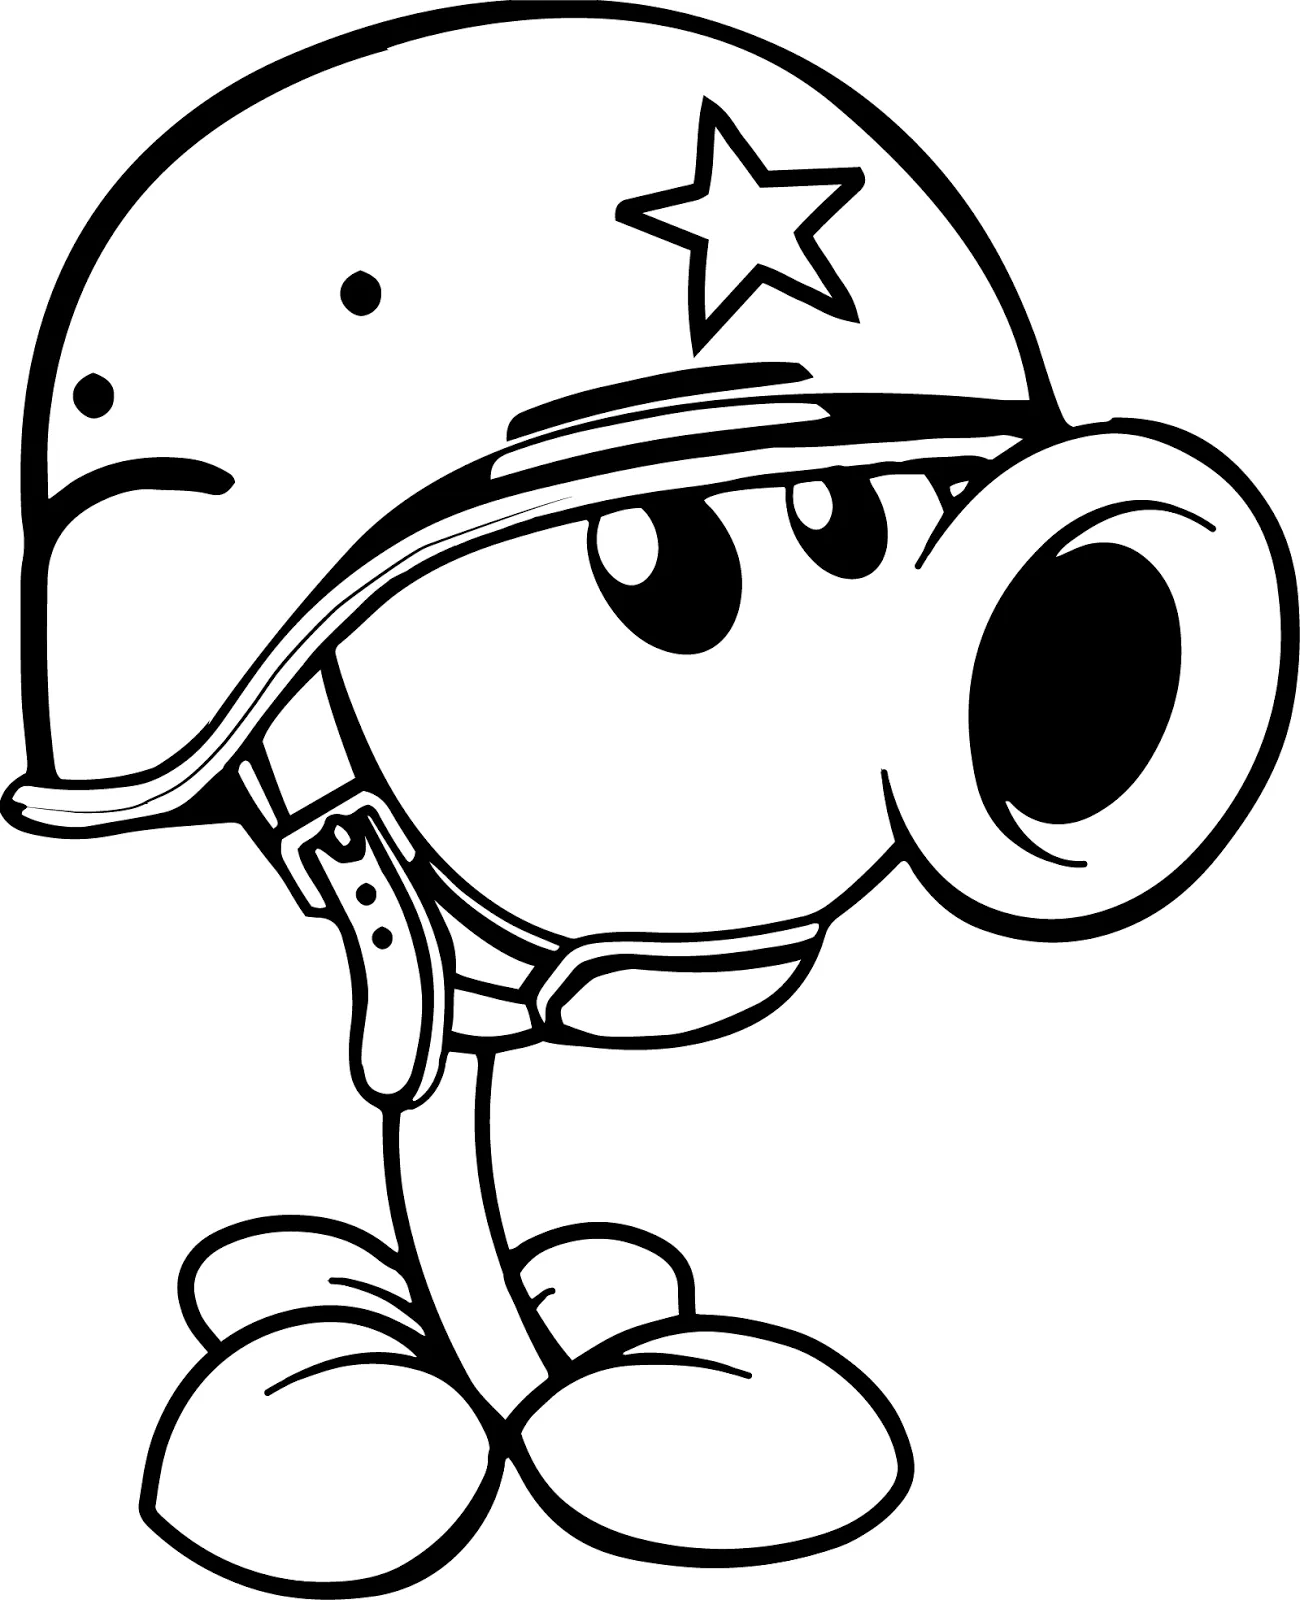 Plants Vs Zombies Coloring Pages | plants vs zombies birthday ...